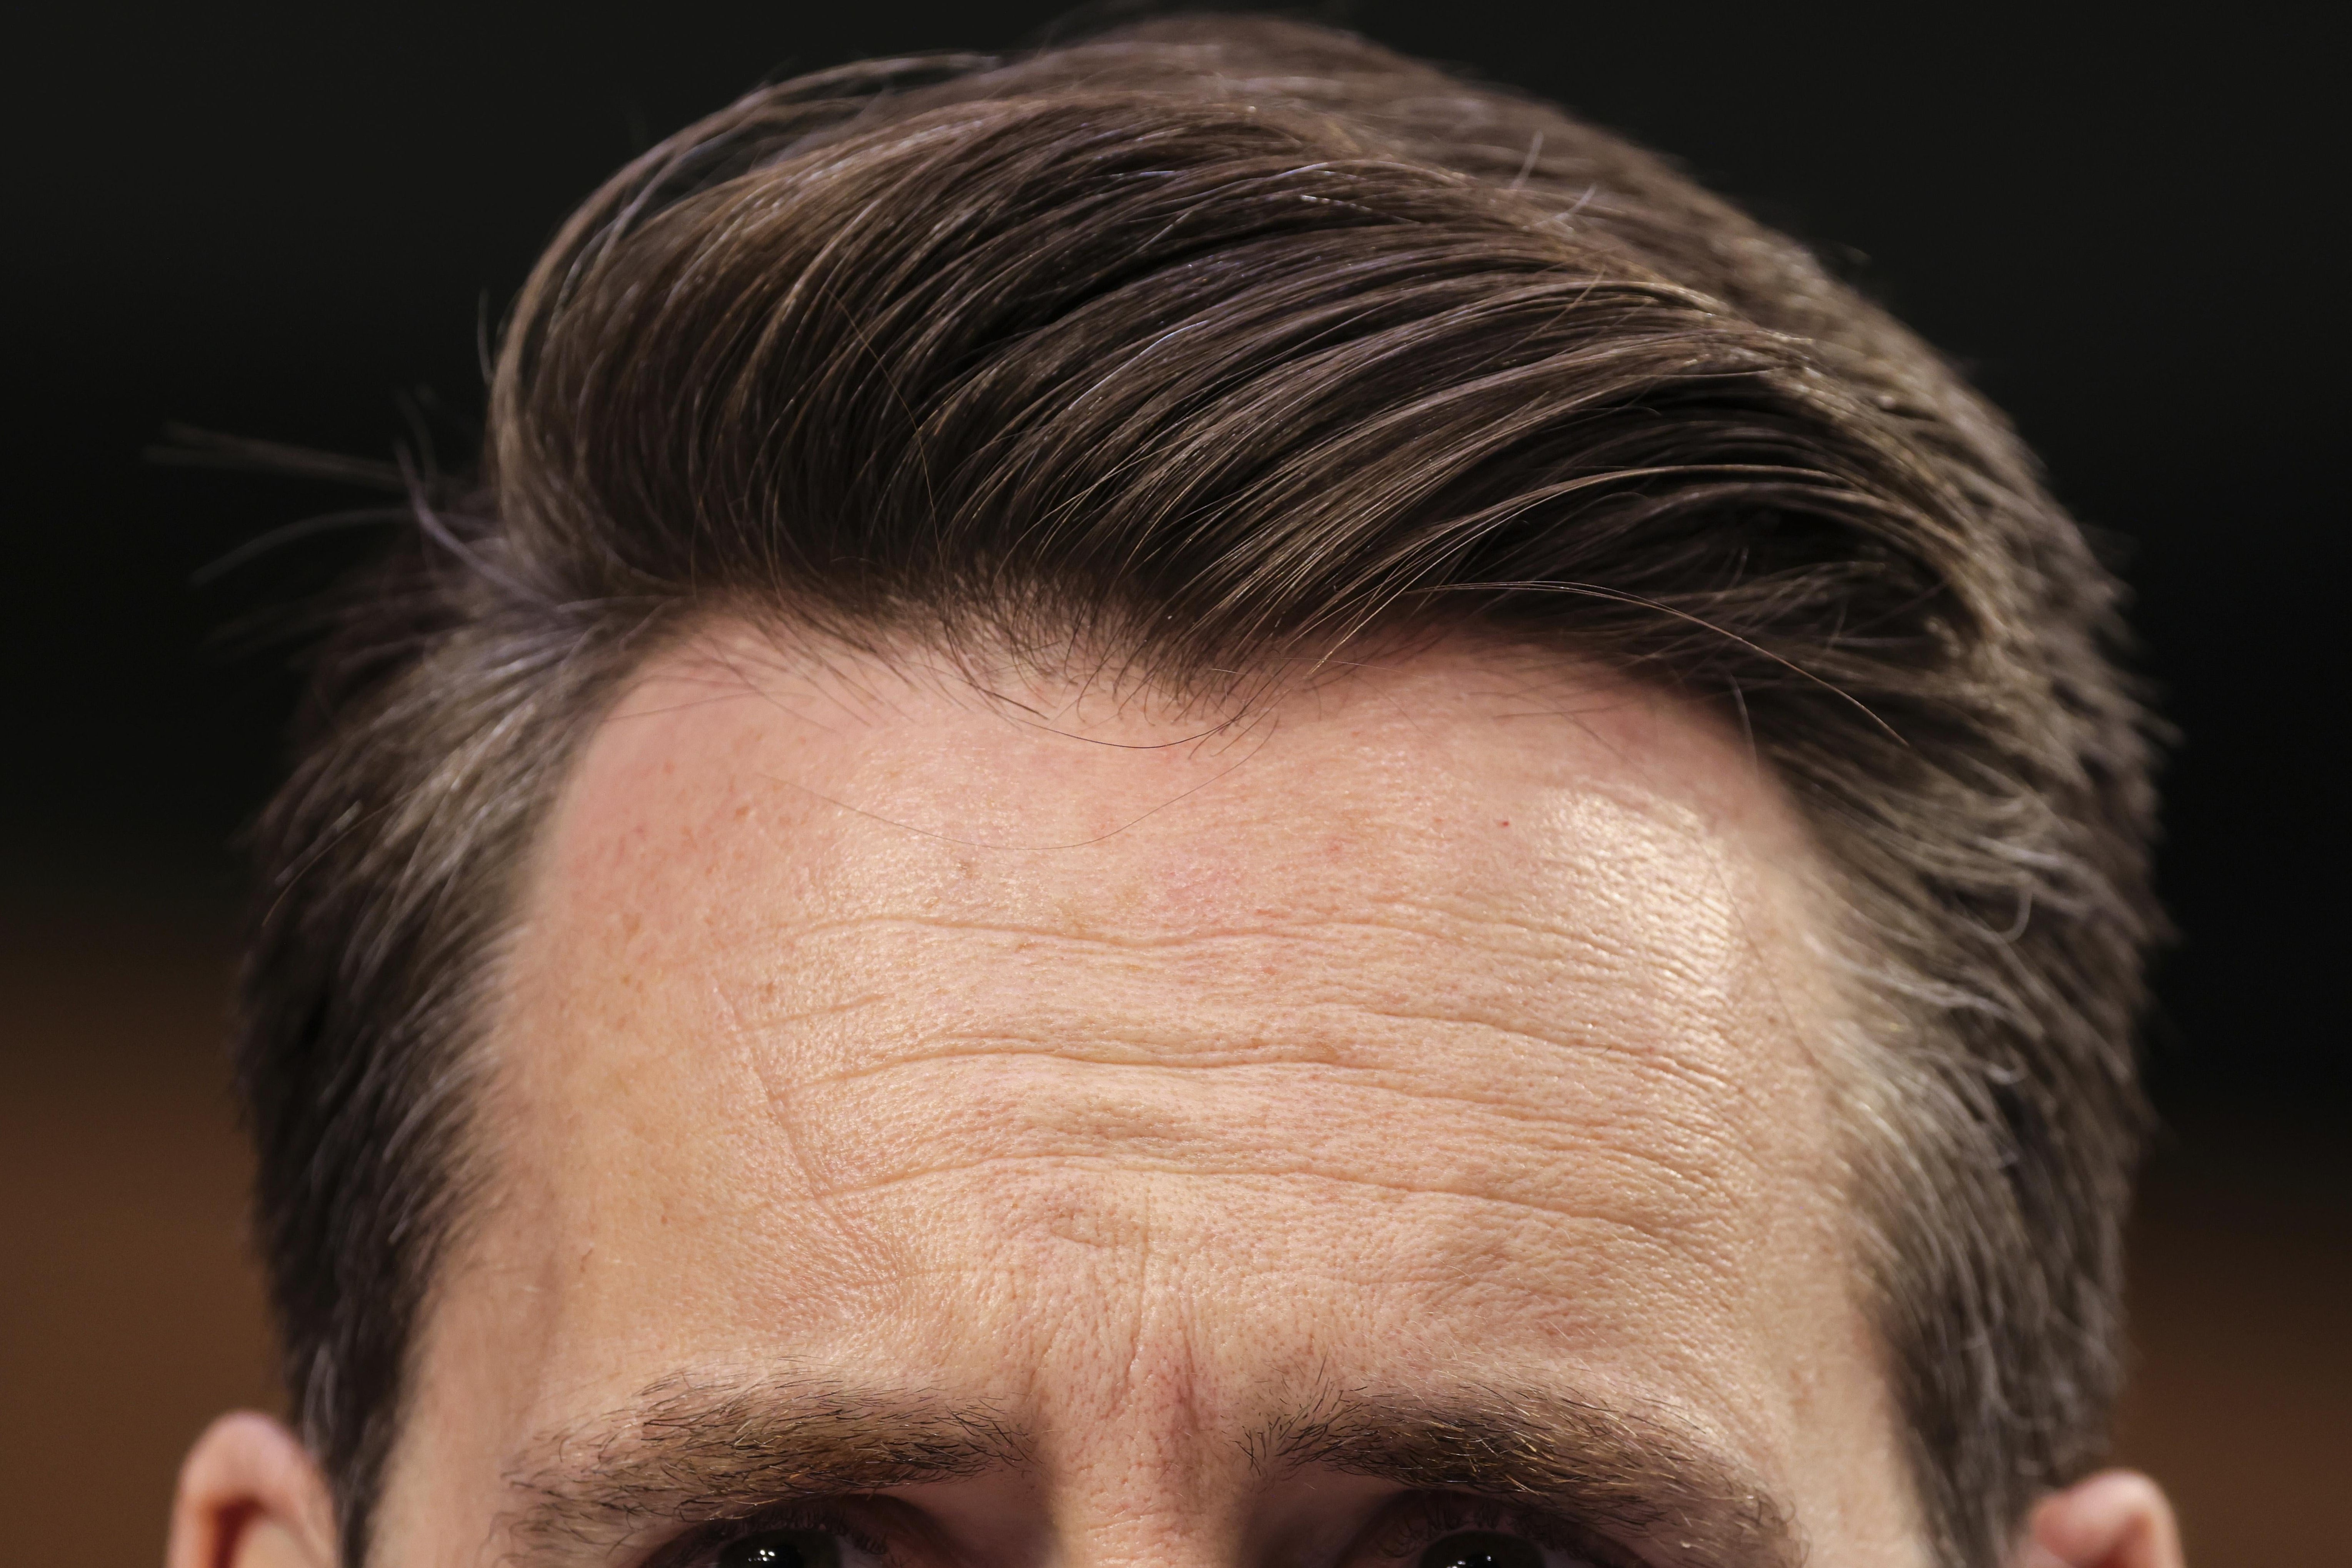 An extreme close up of Josh Hawley's eyes and well-coiffed hair.